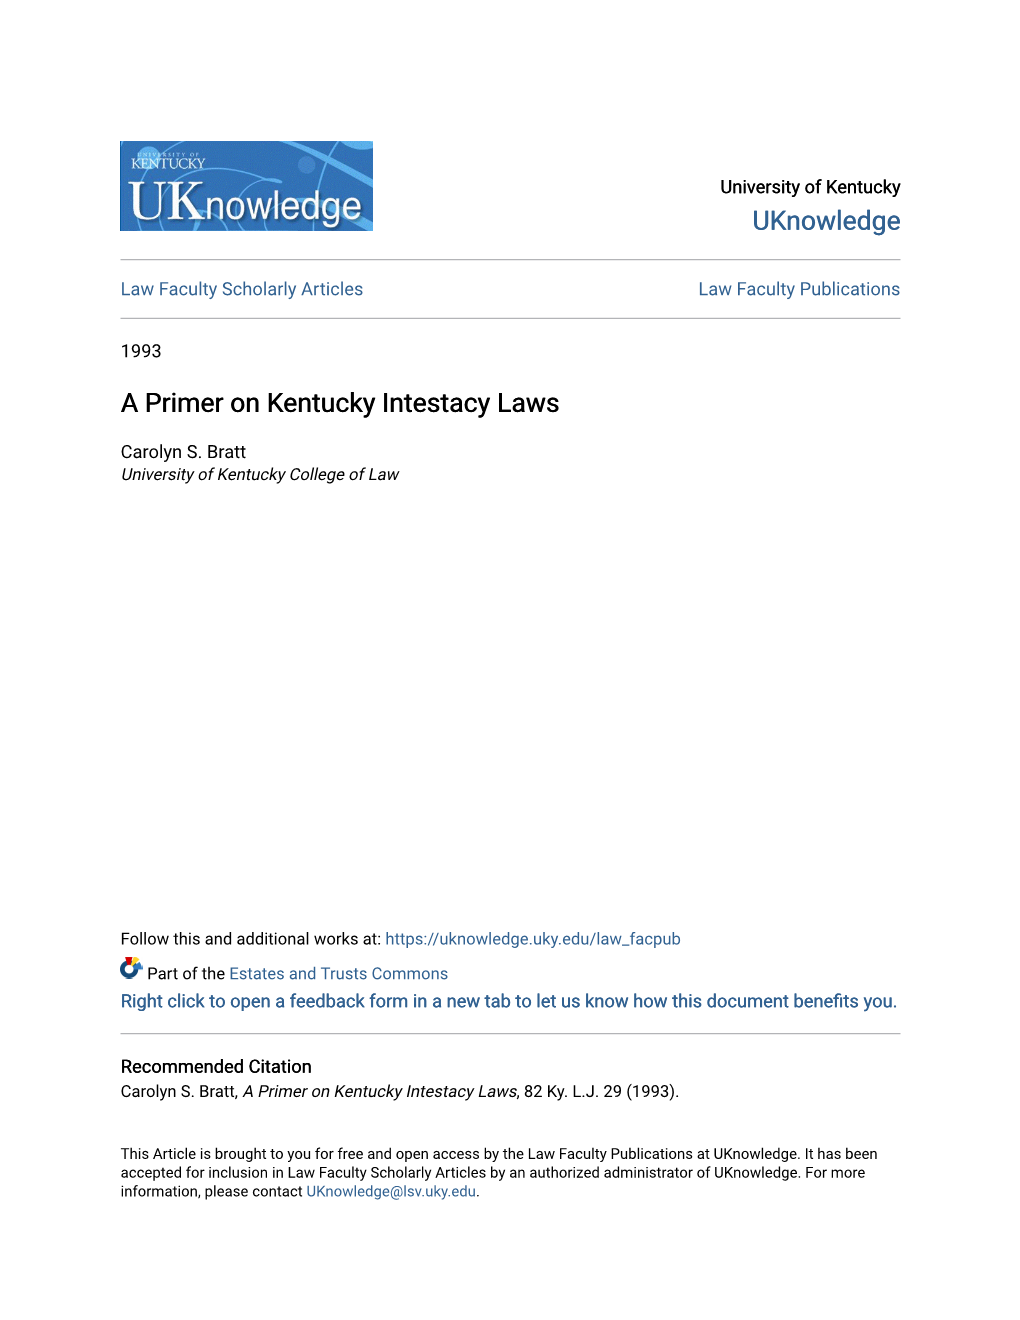 A Primer on Kentucky Intestacy Laws